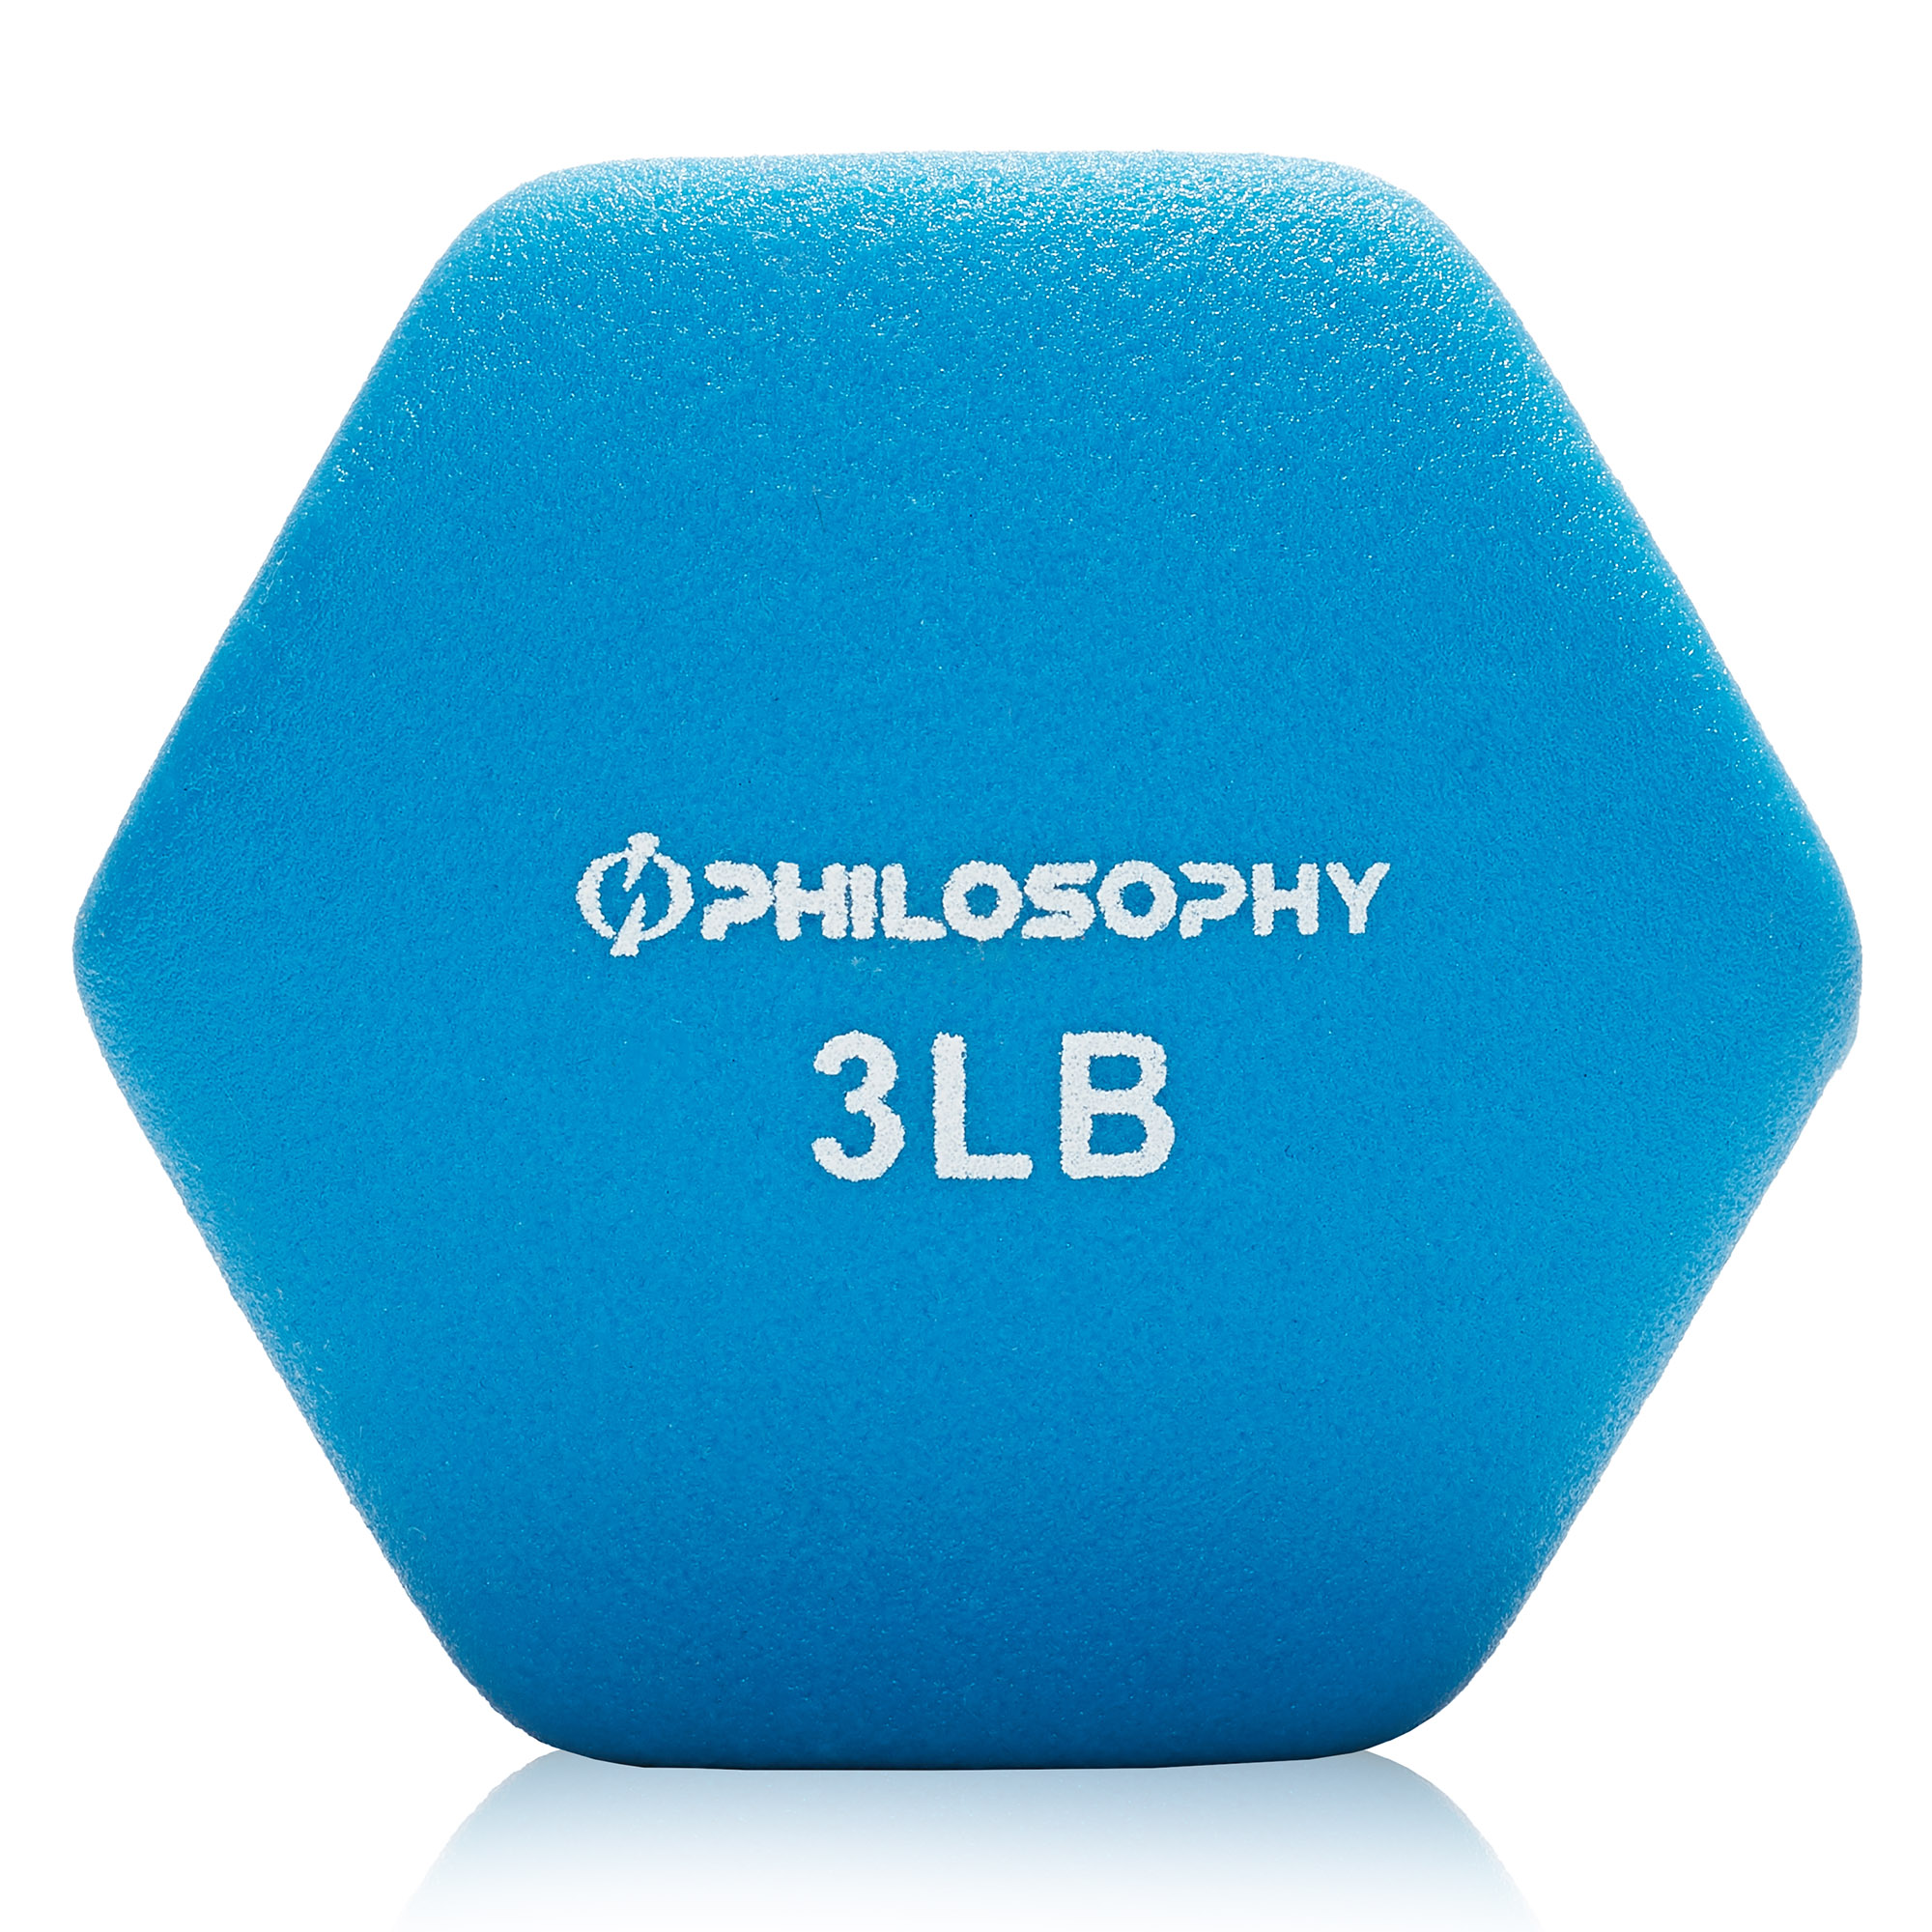 Philosophy Gym Neoprene Hex Dumbbell Hand Weights, Set of 2 - Workout Strength Training